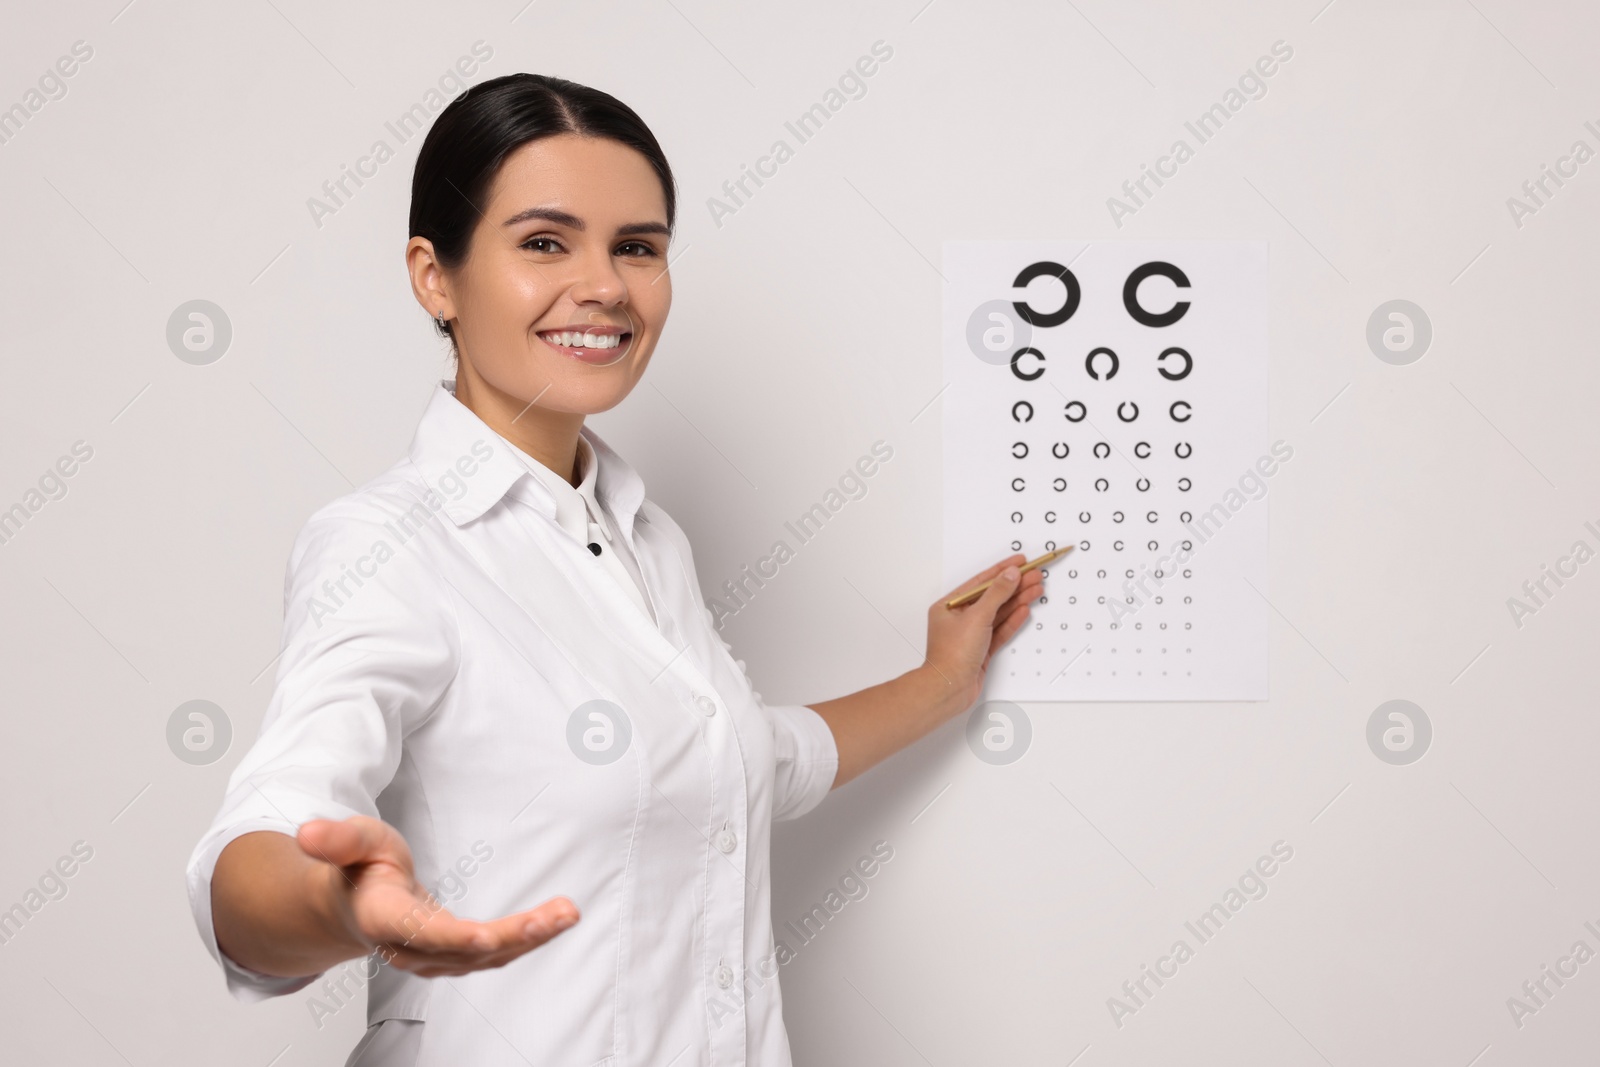 Photo of Ophthalmologist pointing at vision test chart on white wall